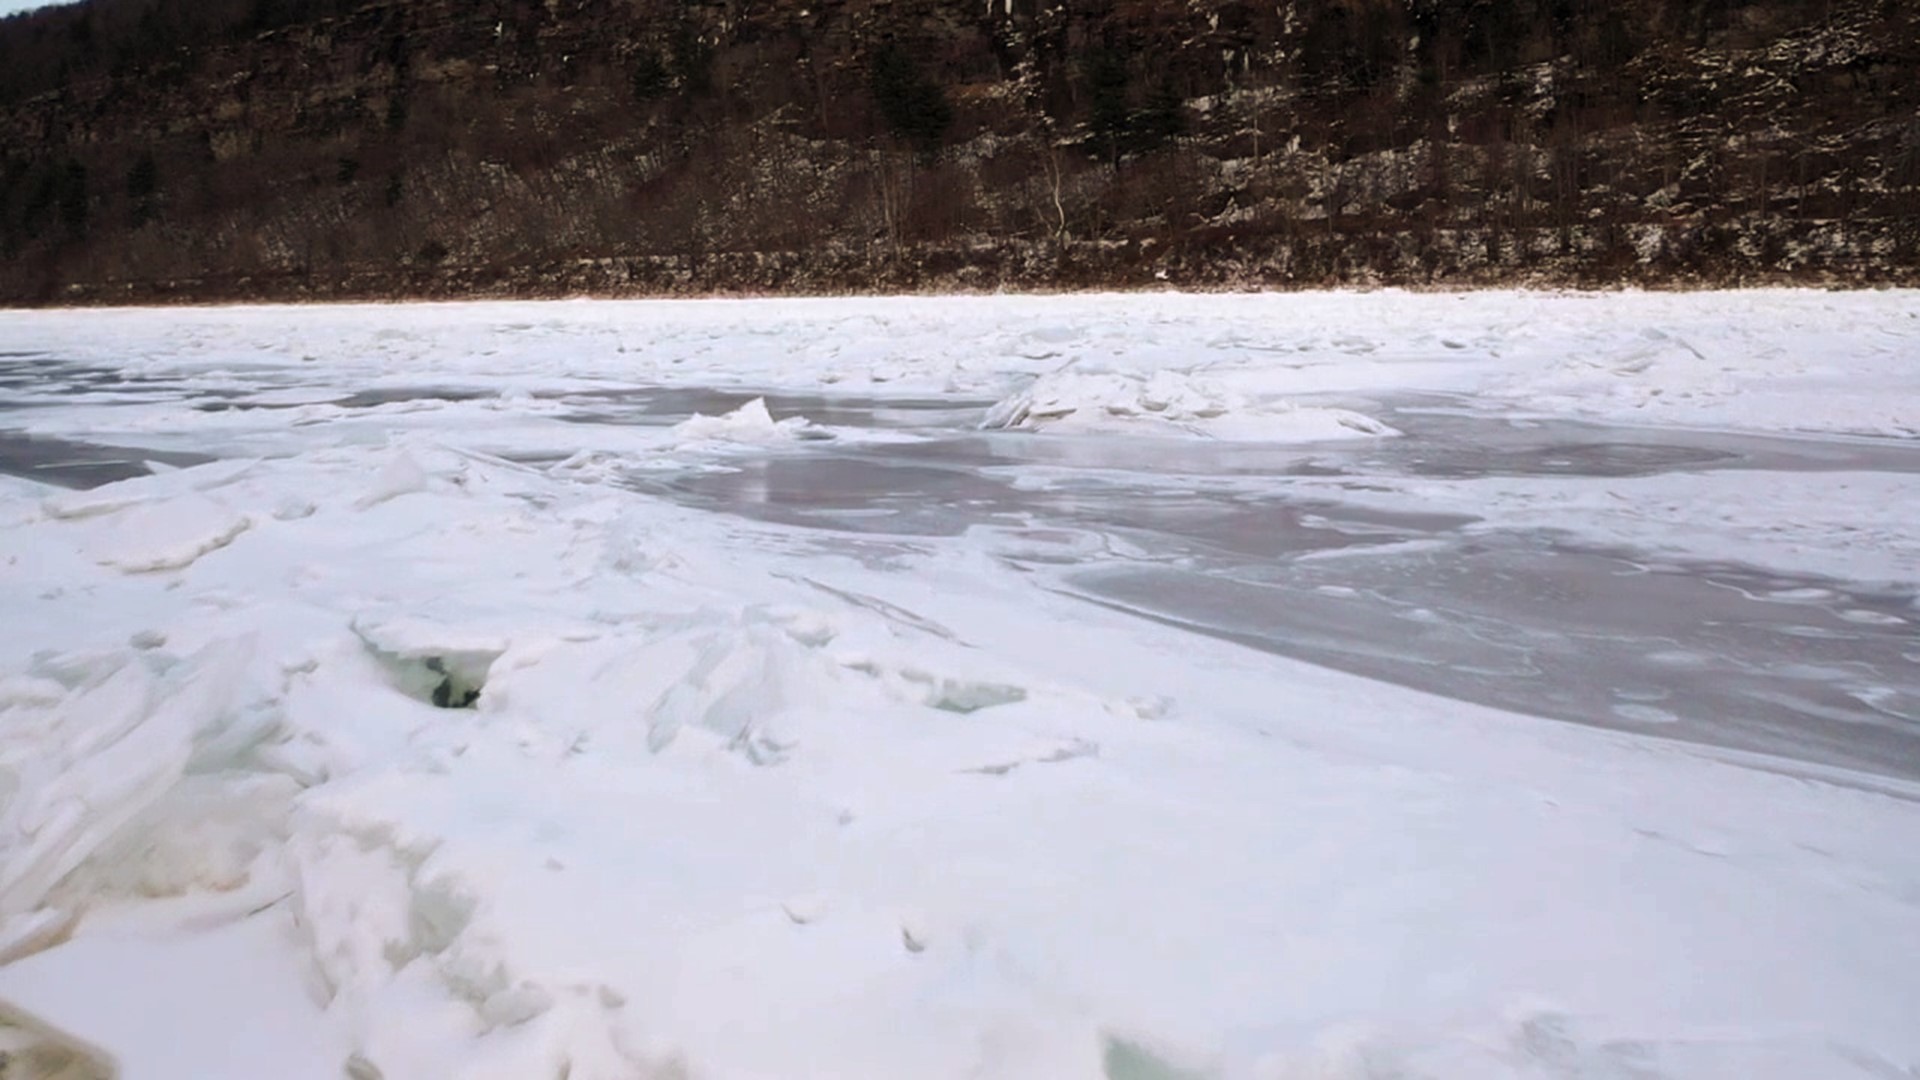 River levels are expected to rise about one to two feet over the next few days, and it is important to stay vigilant when ice and snowmelt are also involved.